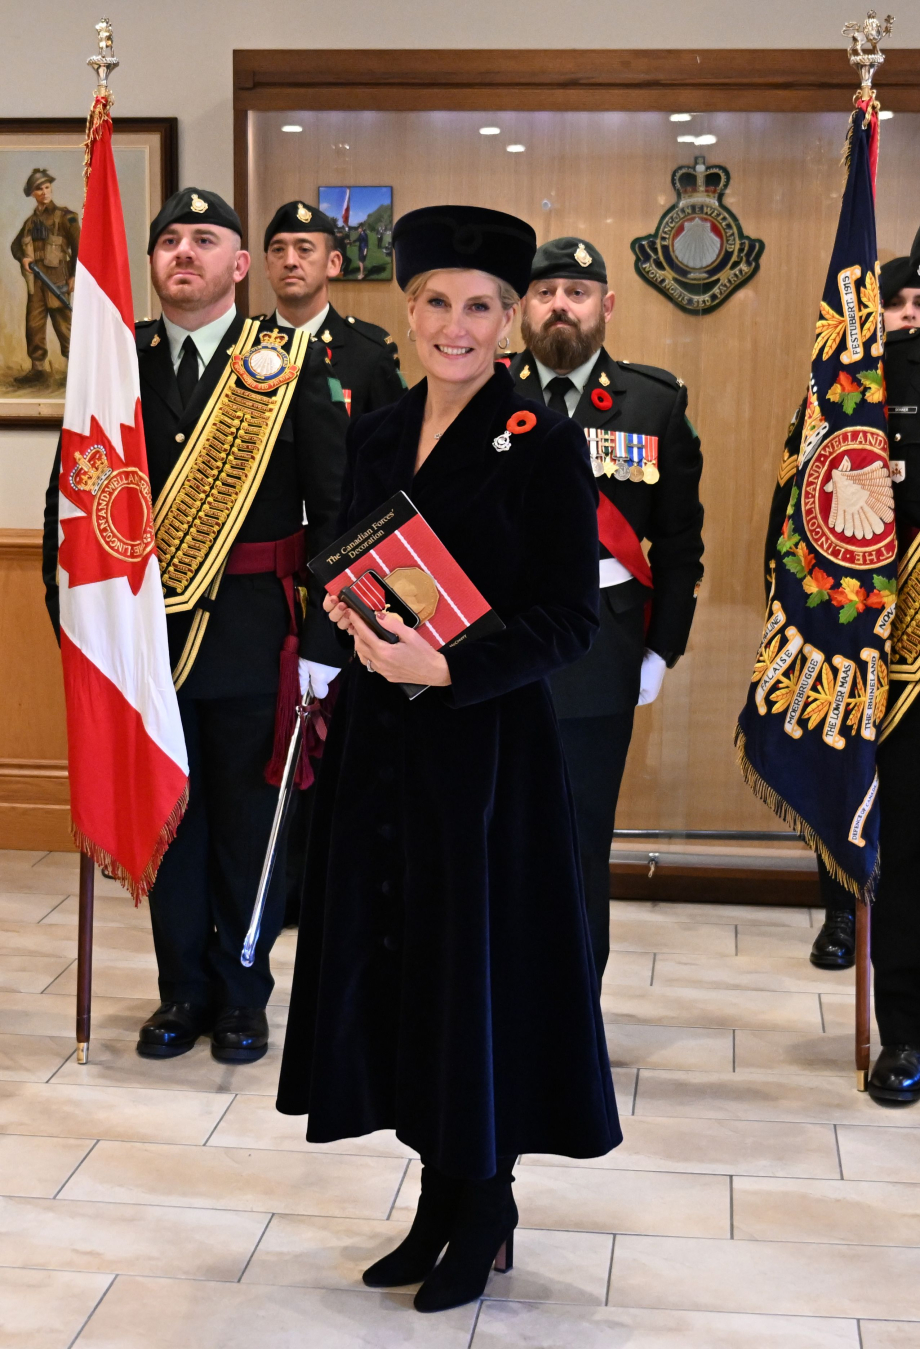 The Duchess was presented with The Canadian Forces' Decoration